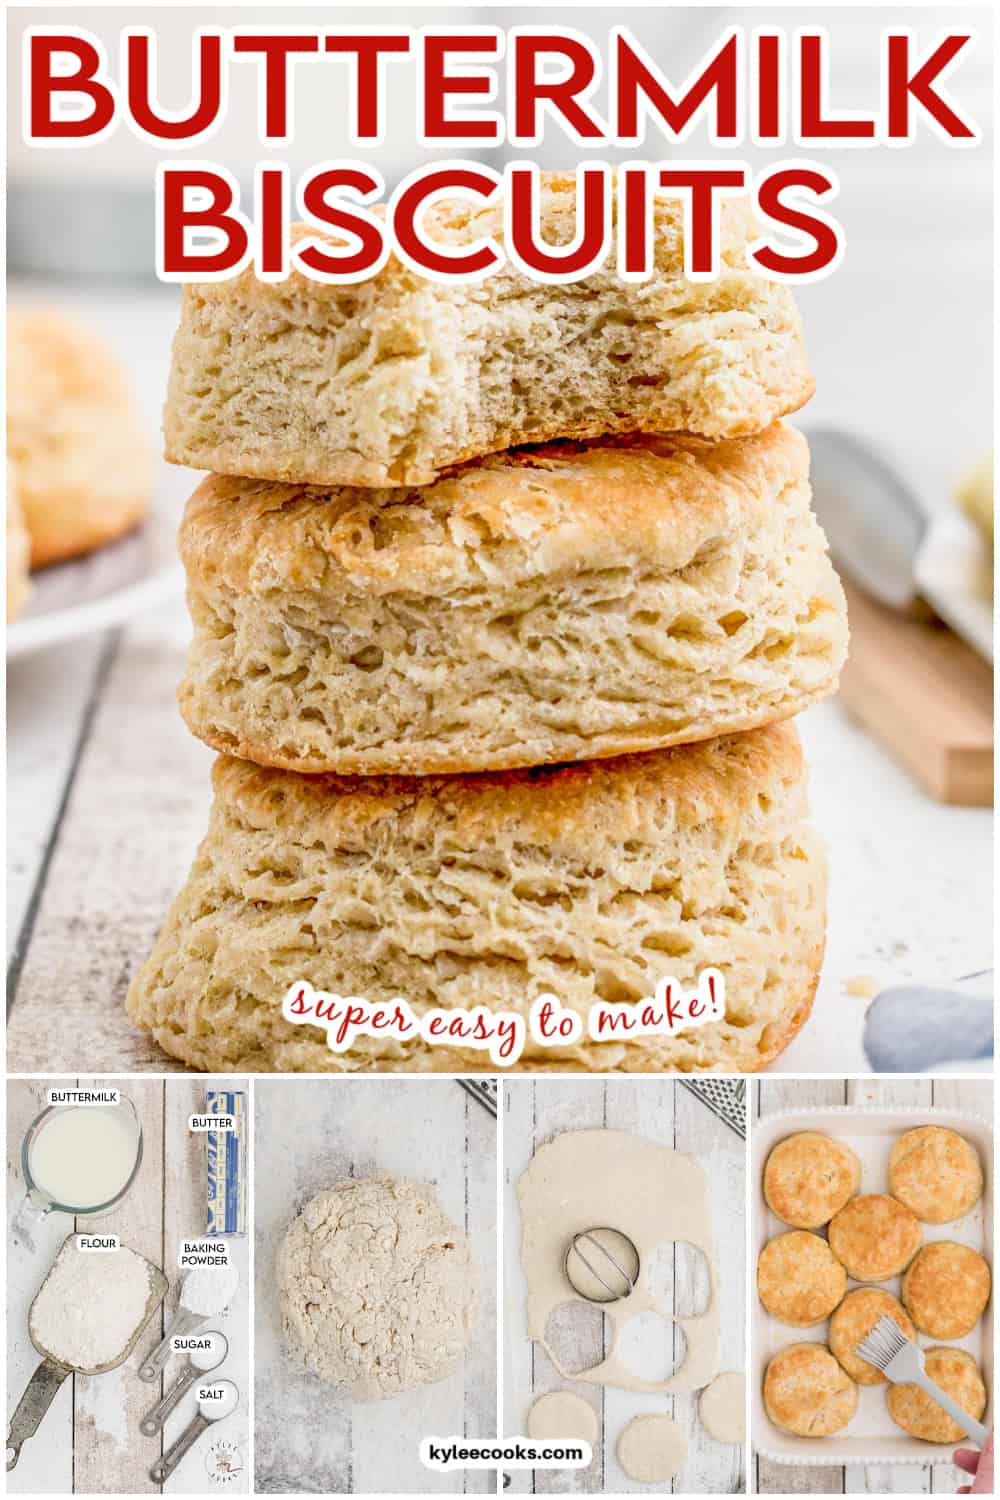 stacked buttermilk biscuits being brushed with butter, with recipe name and ingredients overlaid in text.